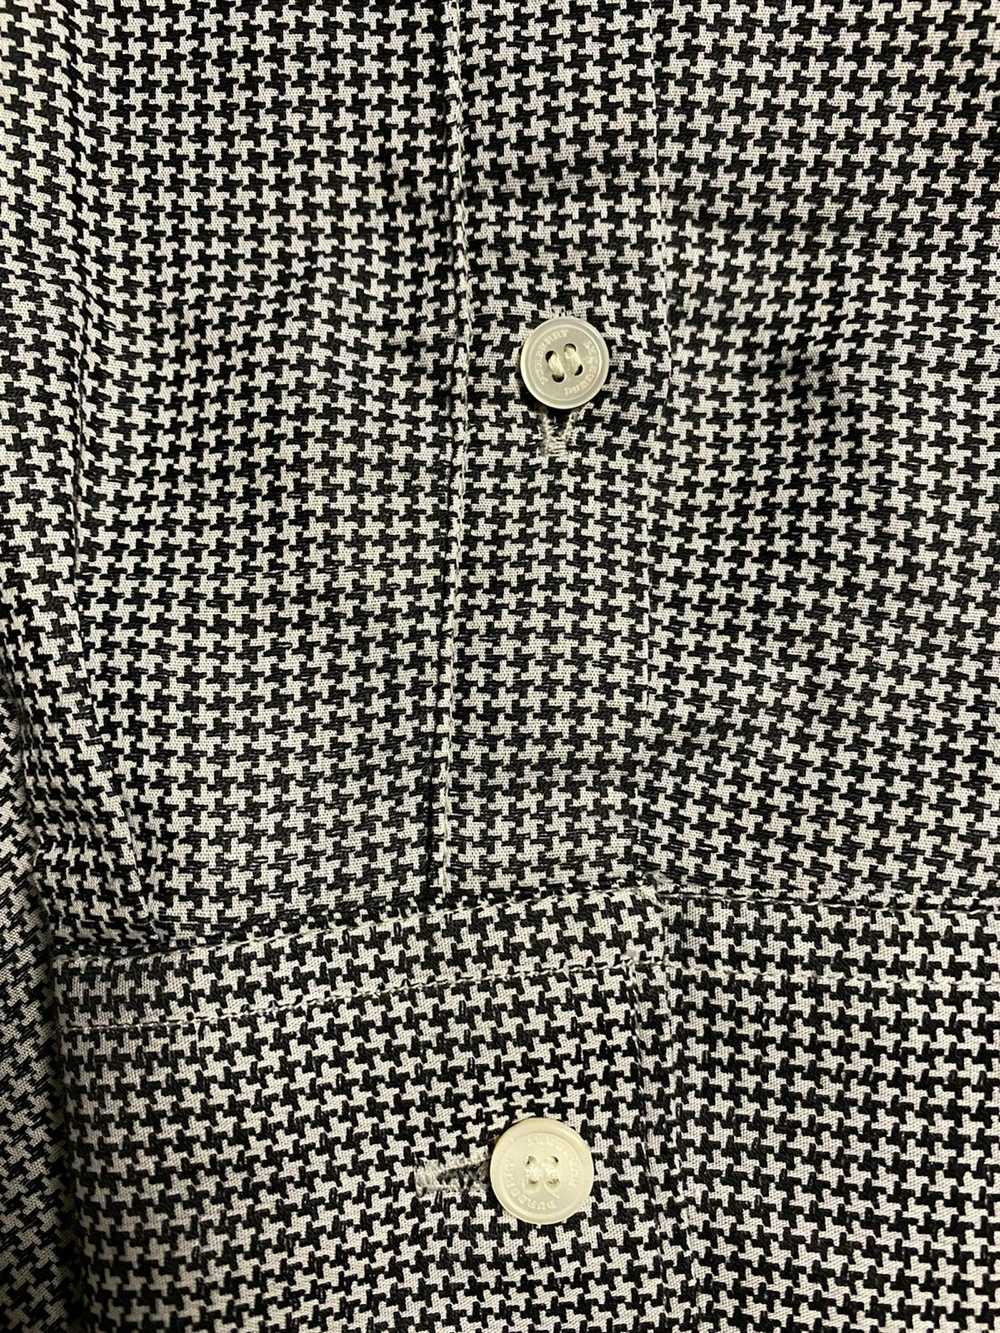 Burberry Burberry Button Up, Mint Condition - image 4